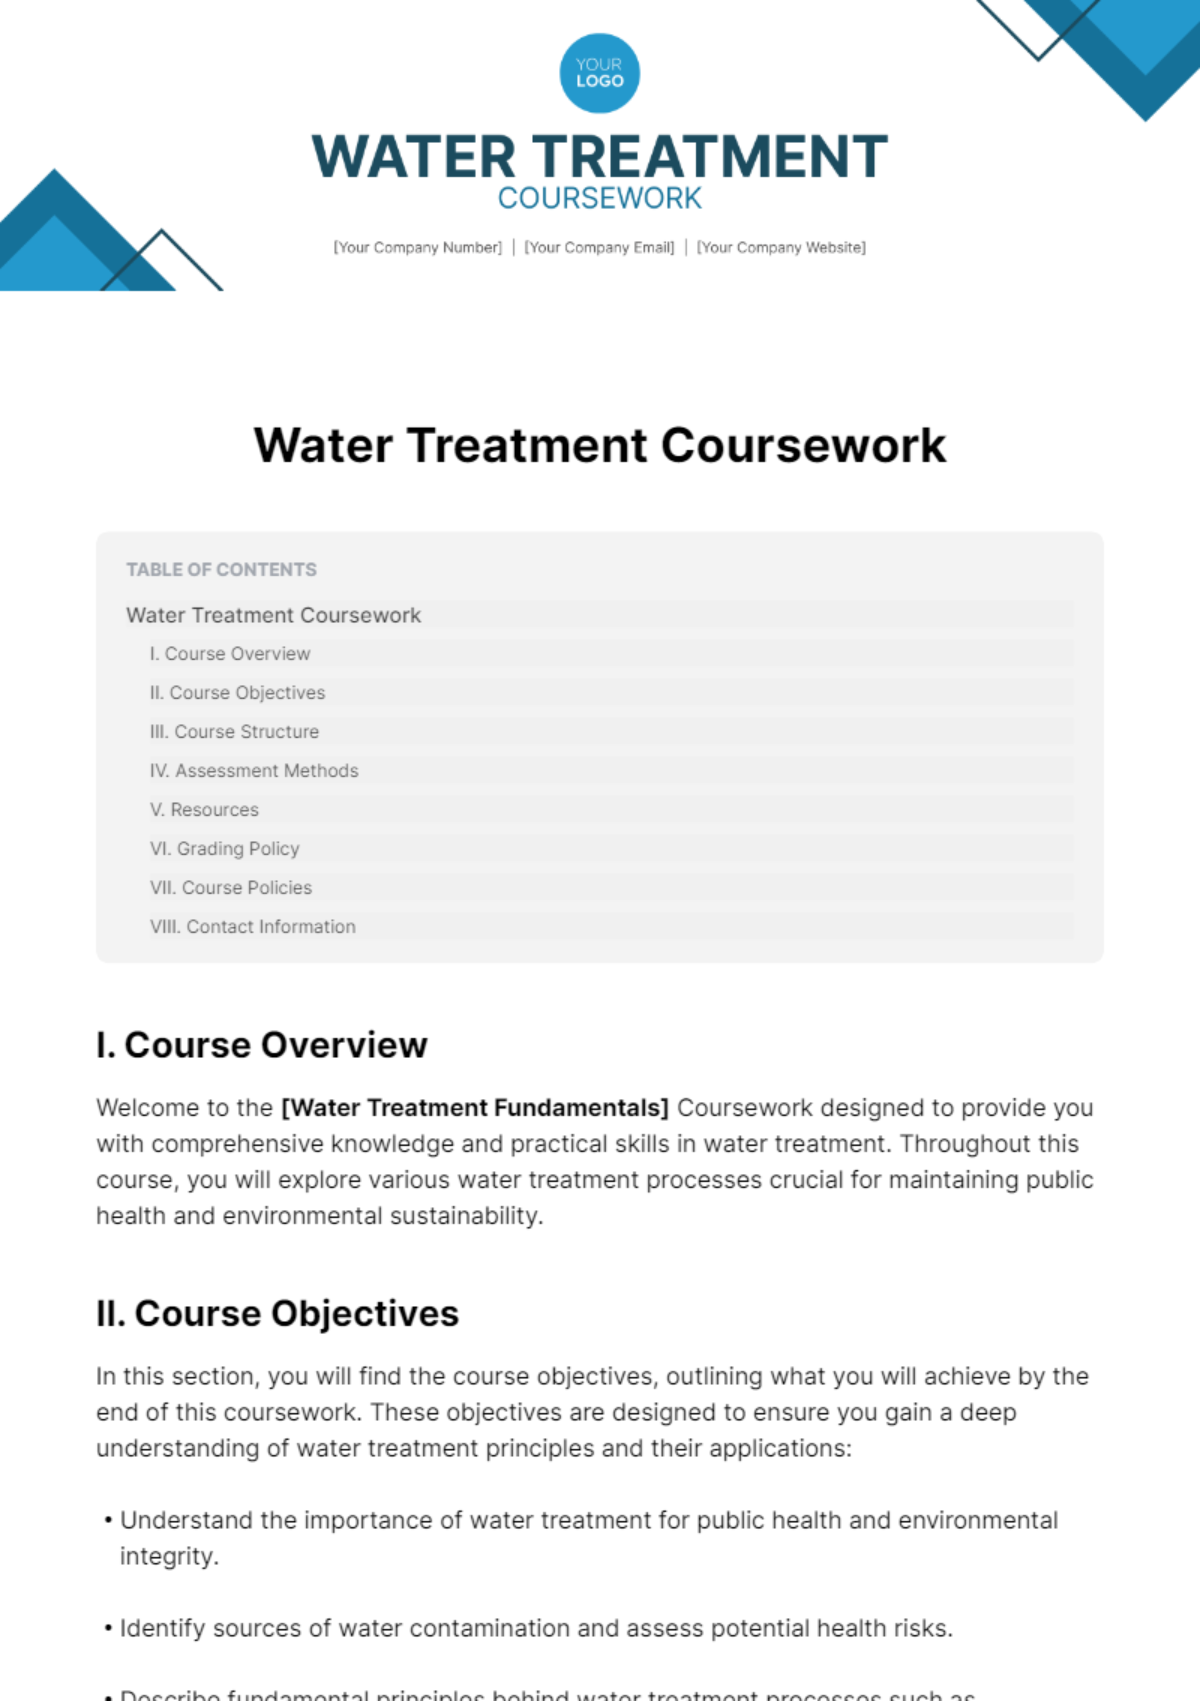 Water Treatment Coursework Template